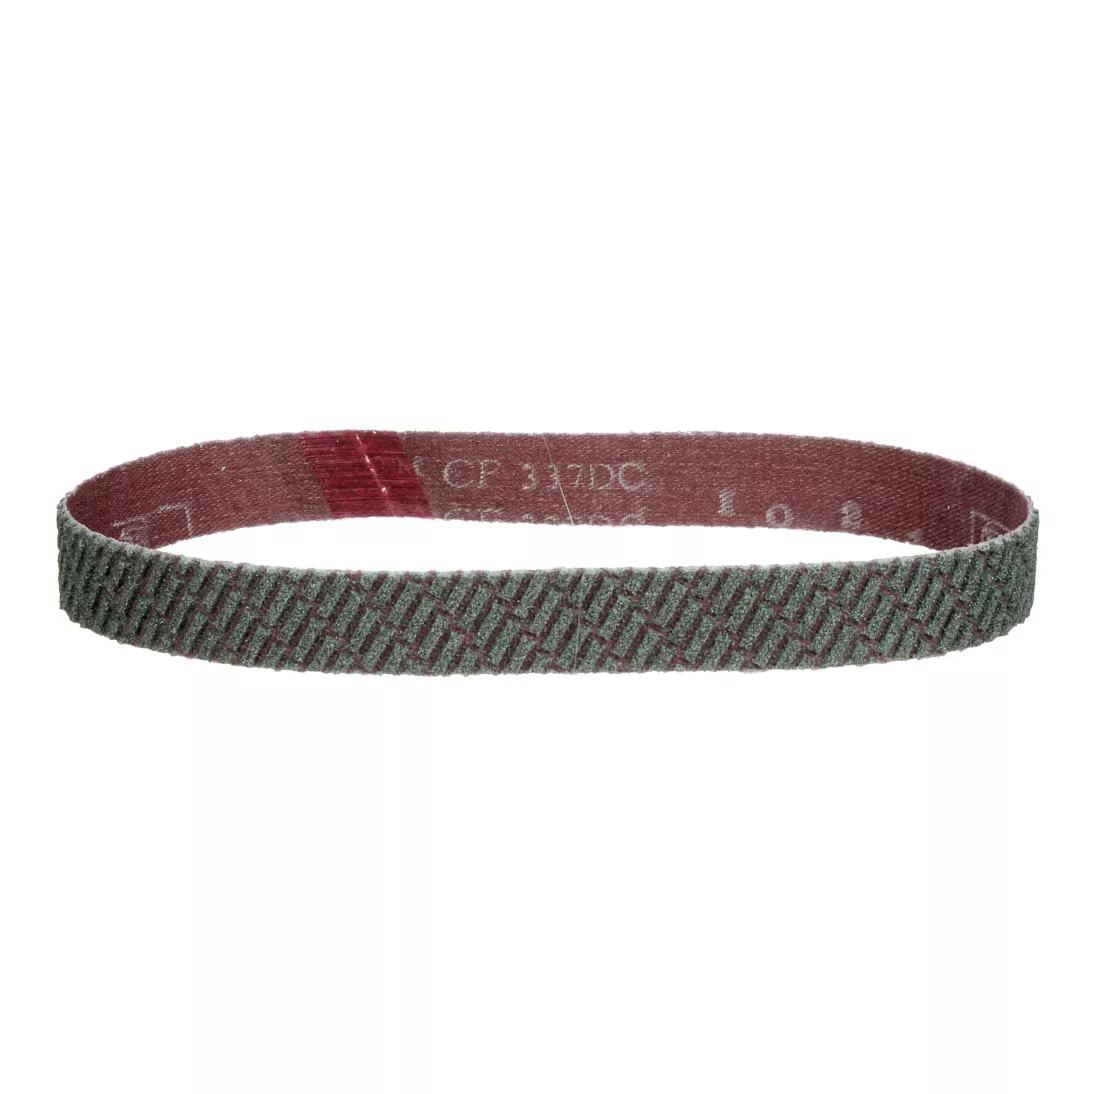 3M™ Trizact™ Cloth Belt 337DC, 1/2 in X 24 in A45 X-weight, 20 ea/Case